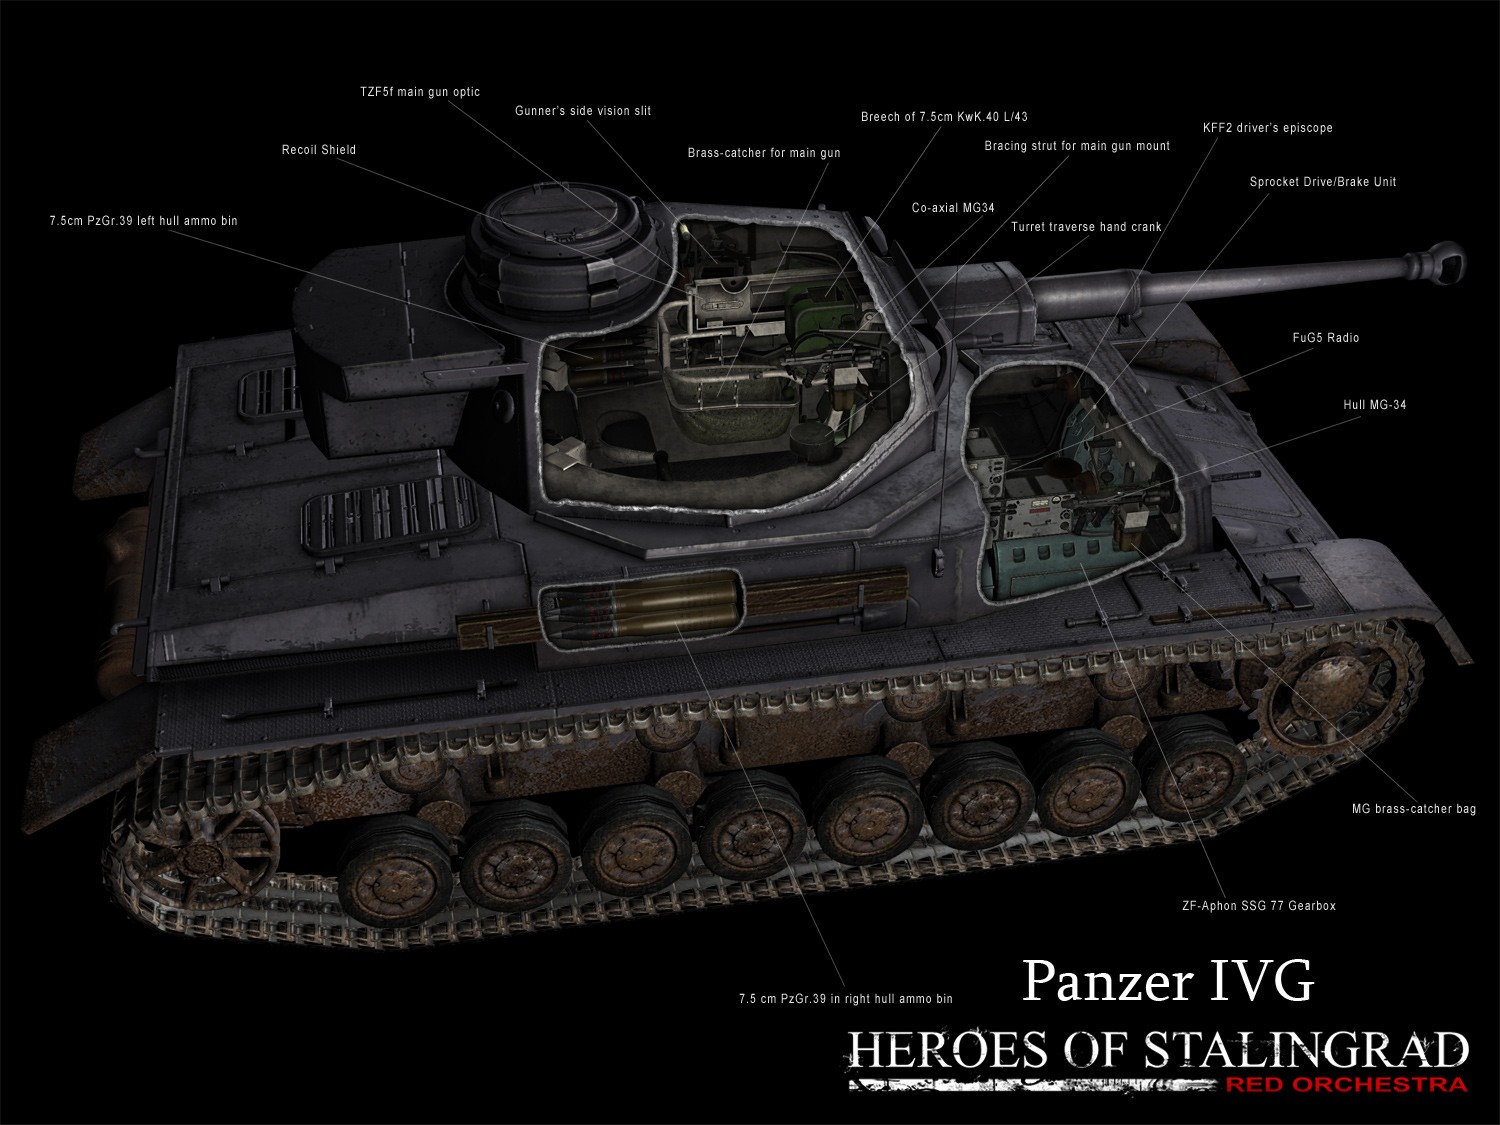 red orchestra 2 heroes of stalingrad campaign